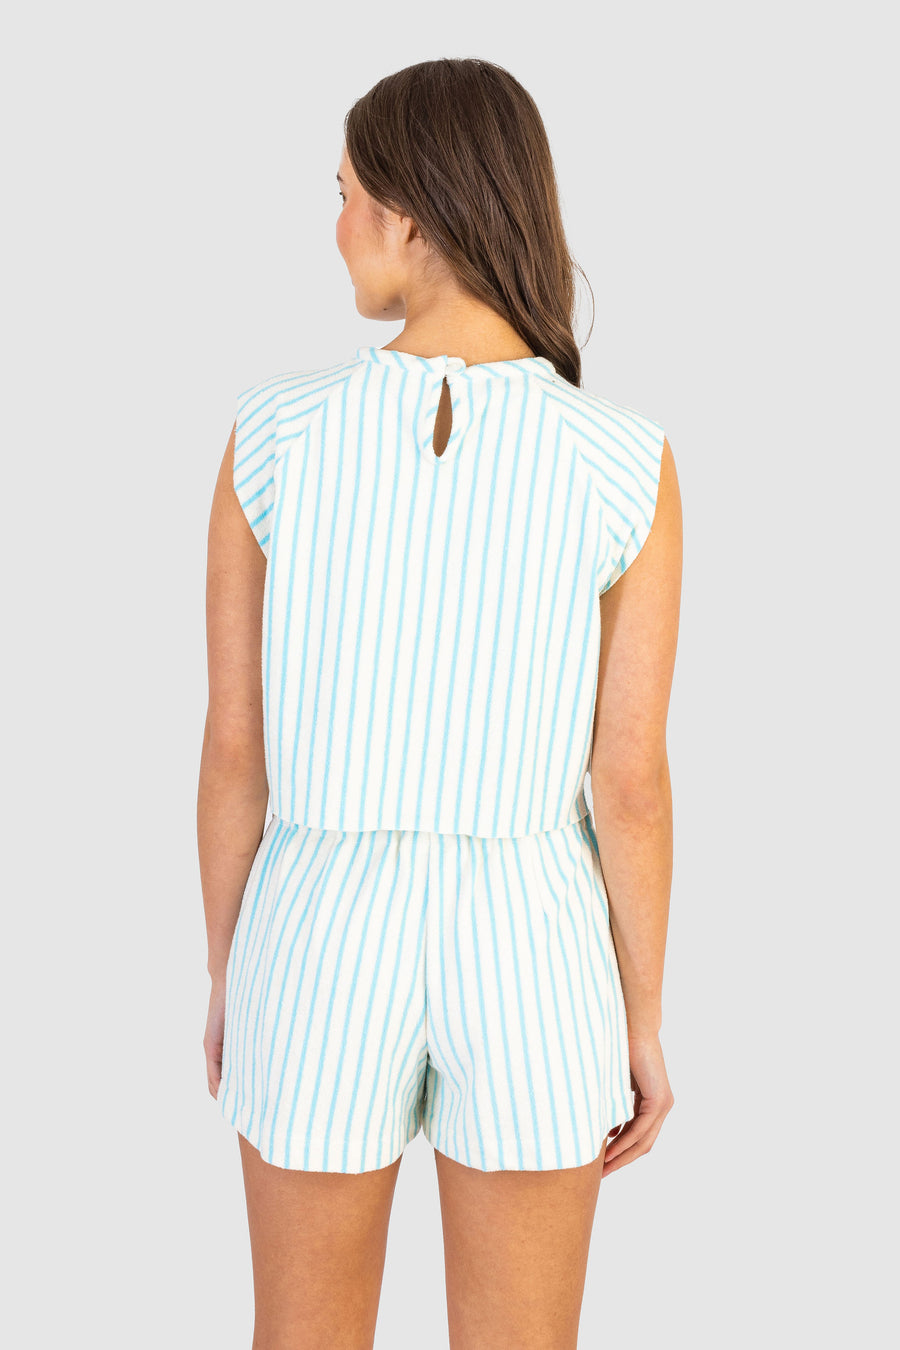 Molly Top Beach Blue Stripe *Limited*Edition*